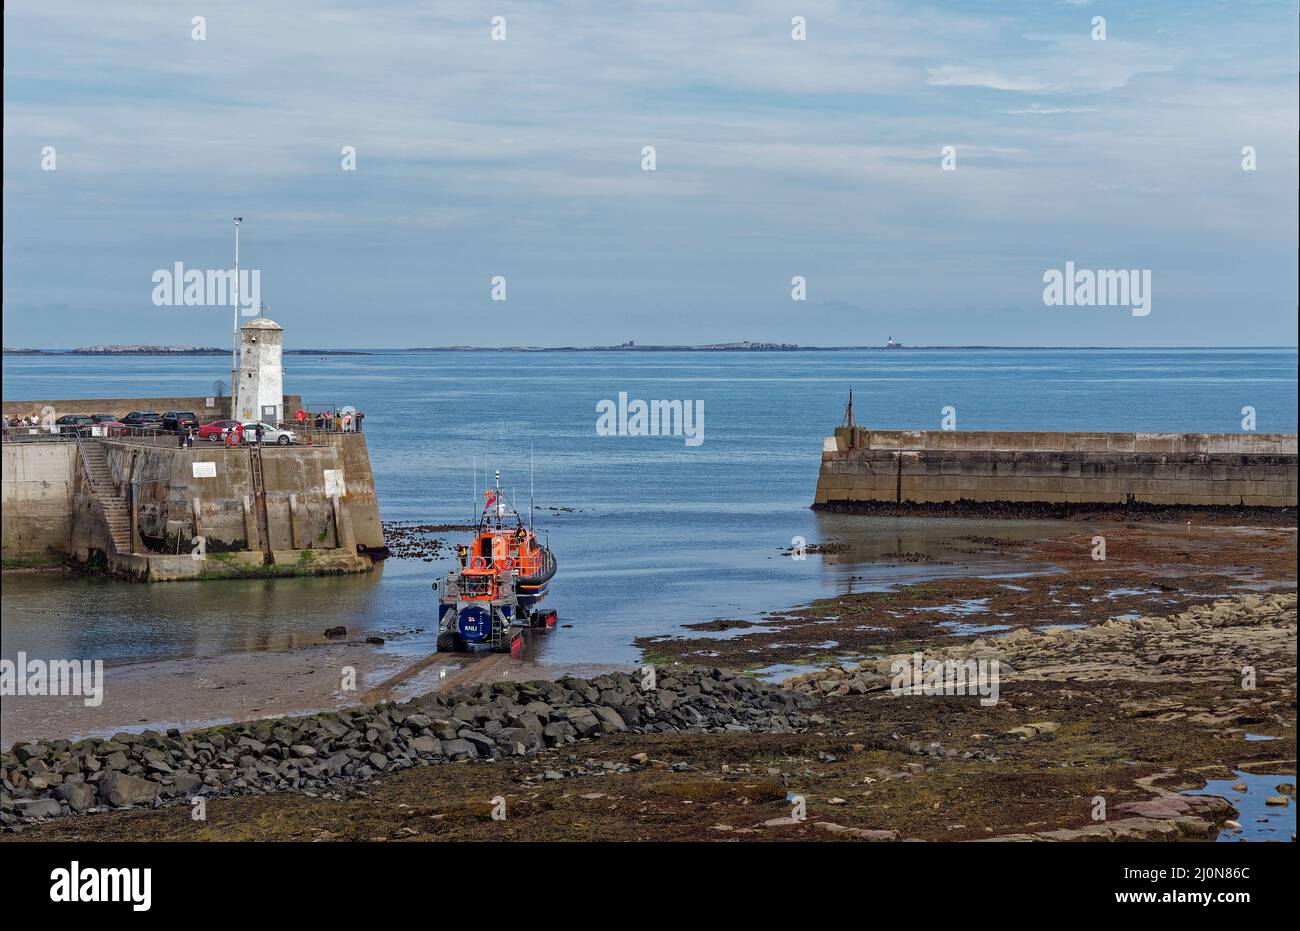 The Shannon Class Lifeboat being launched using its Tracked launch Vehicle approaching the harbour Entrance at Seahouses. Stock Photo